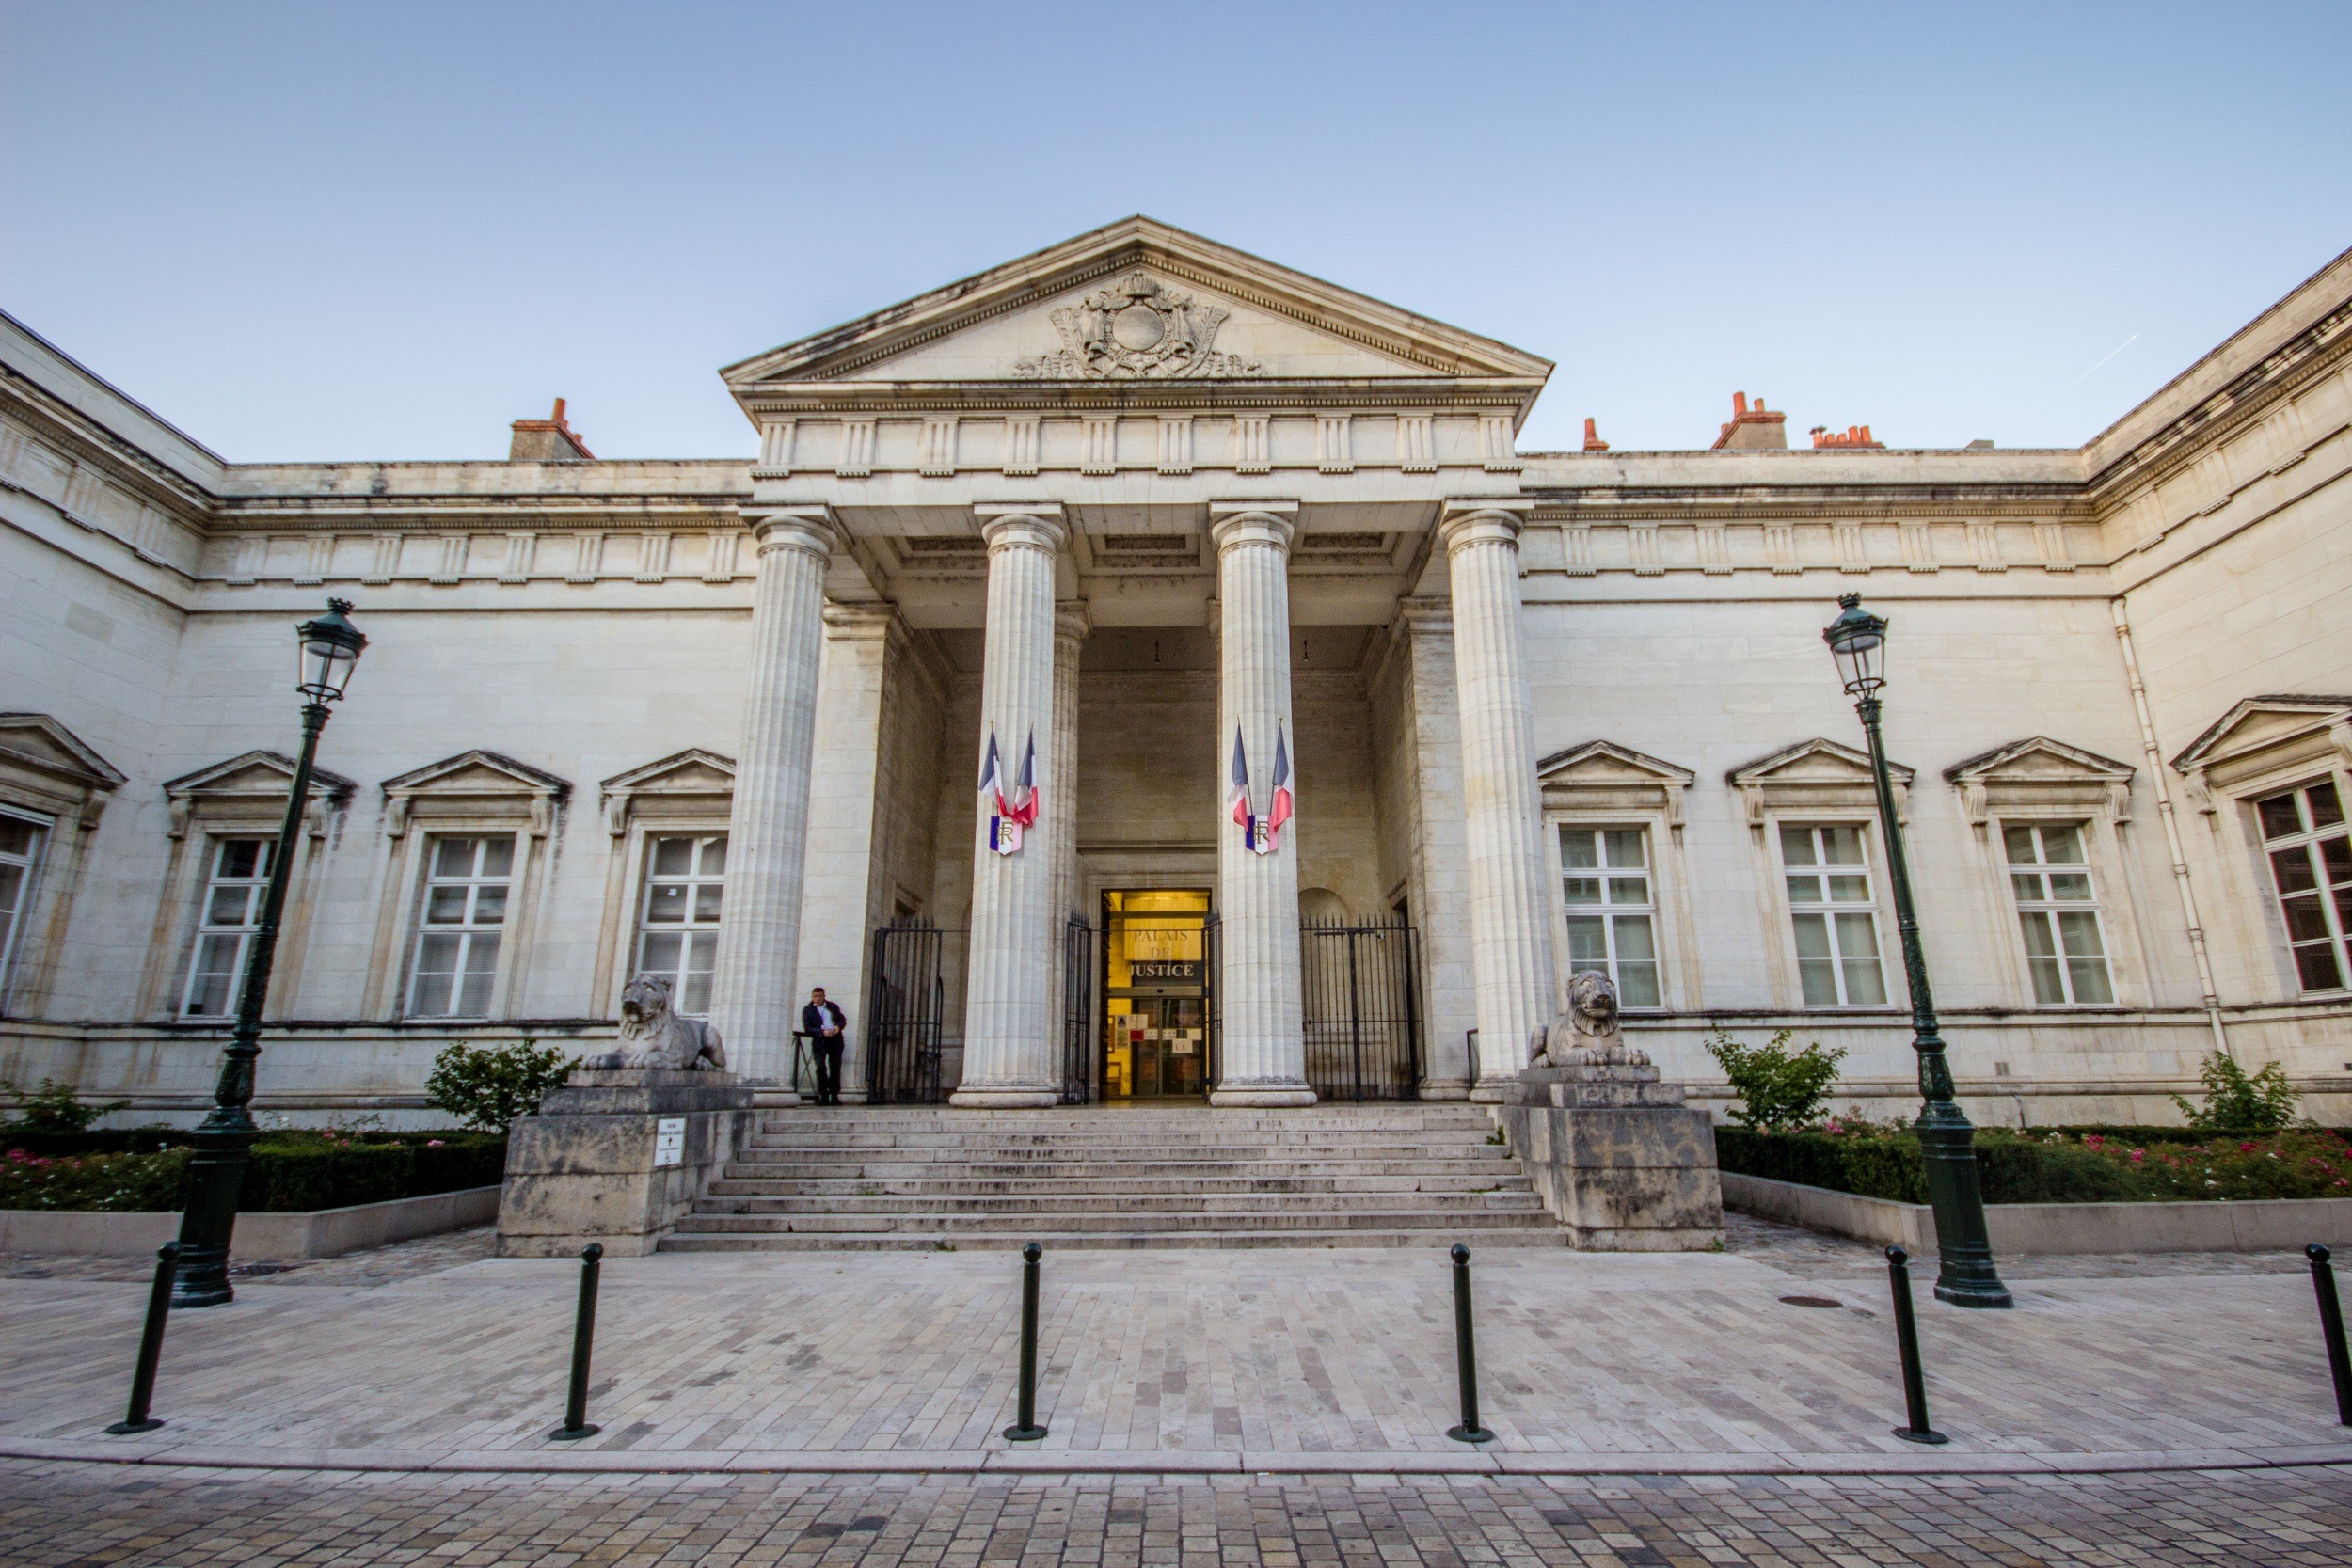 The courthouse in Orleans, France